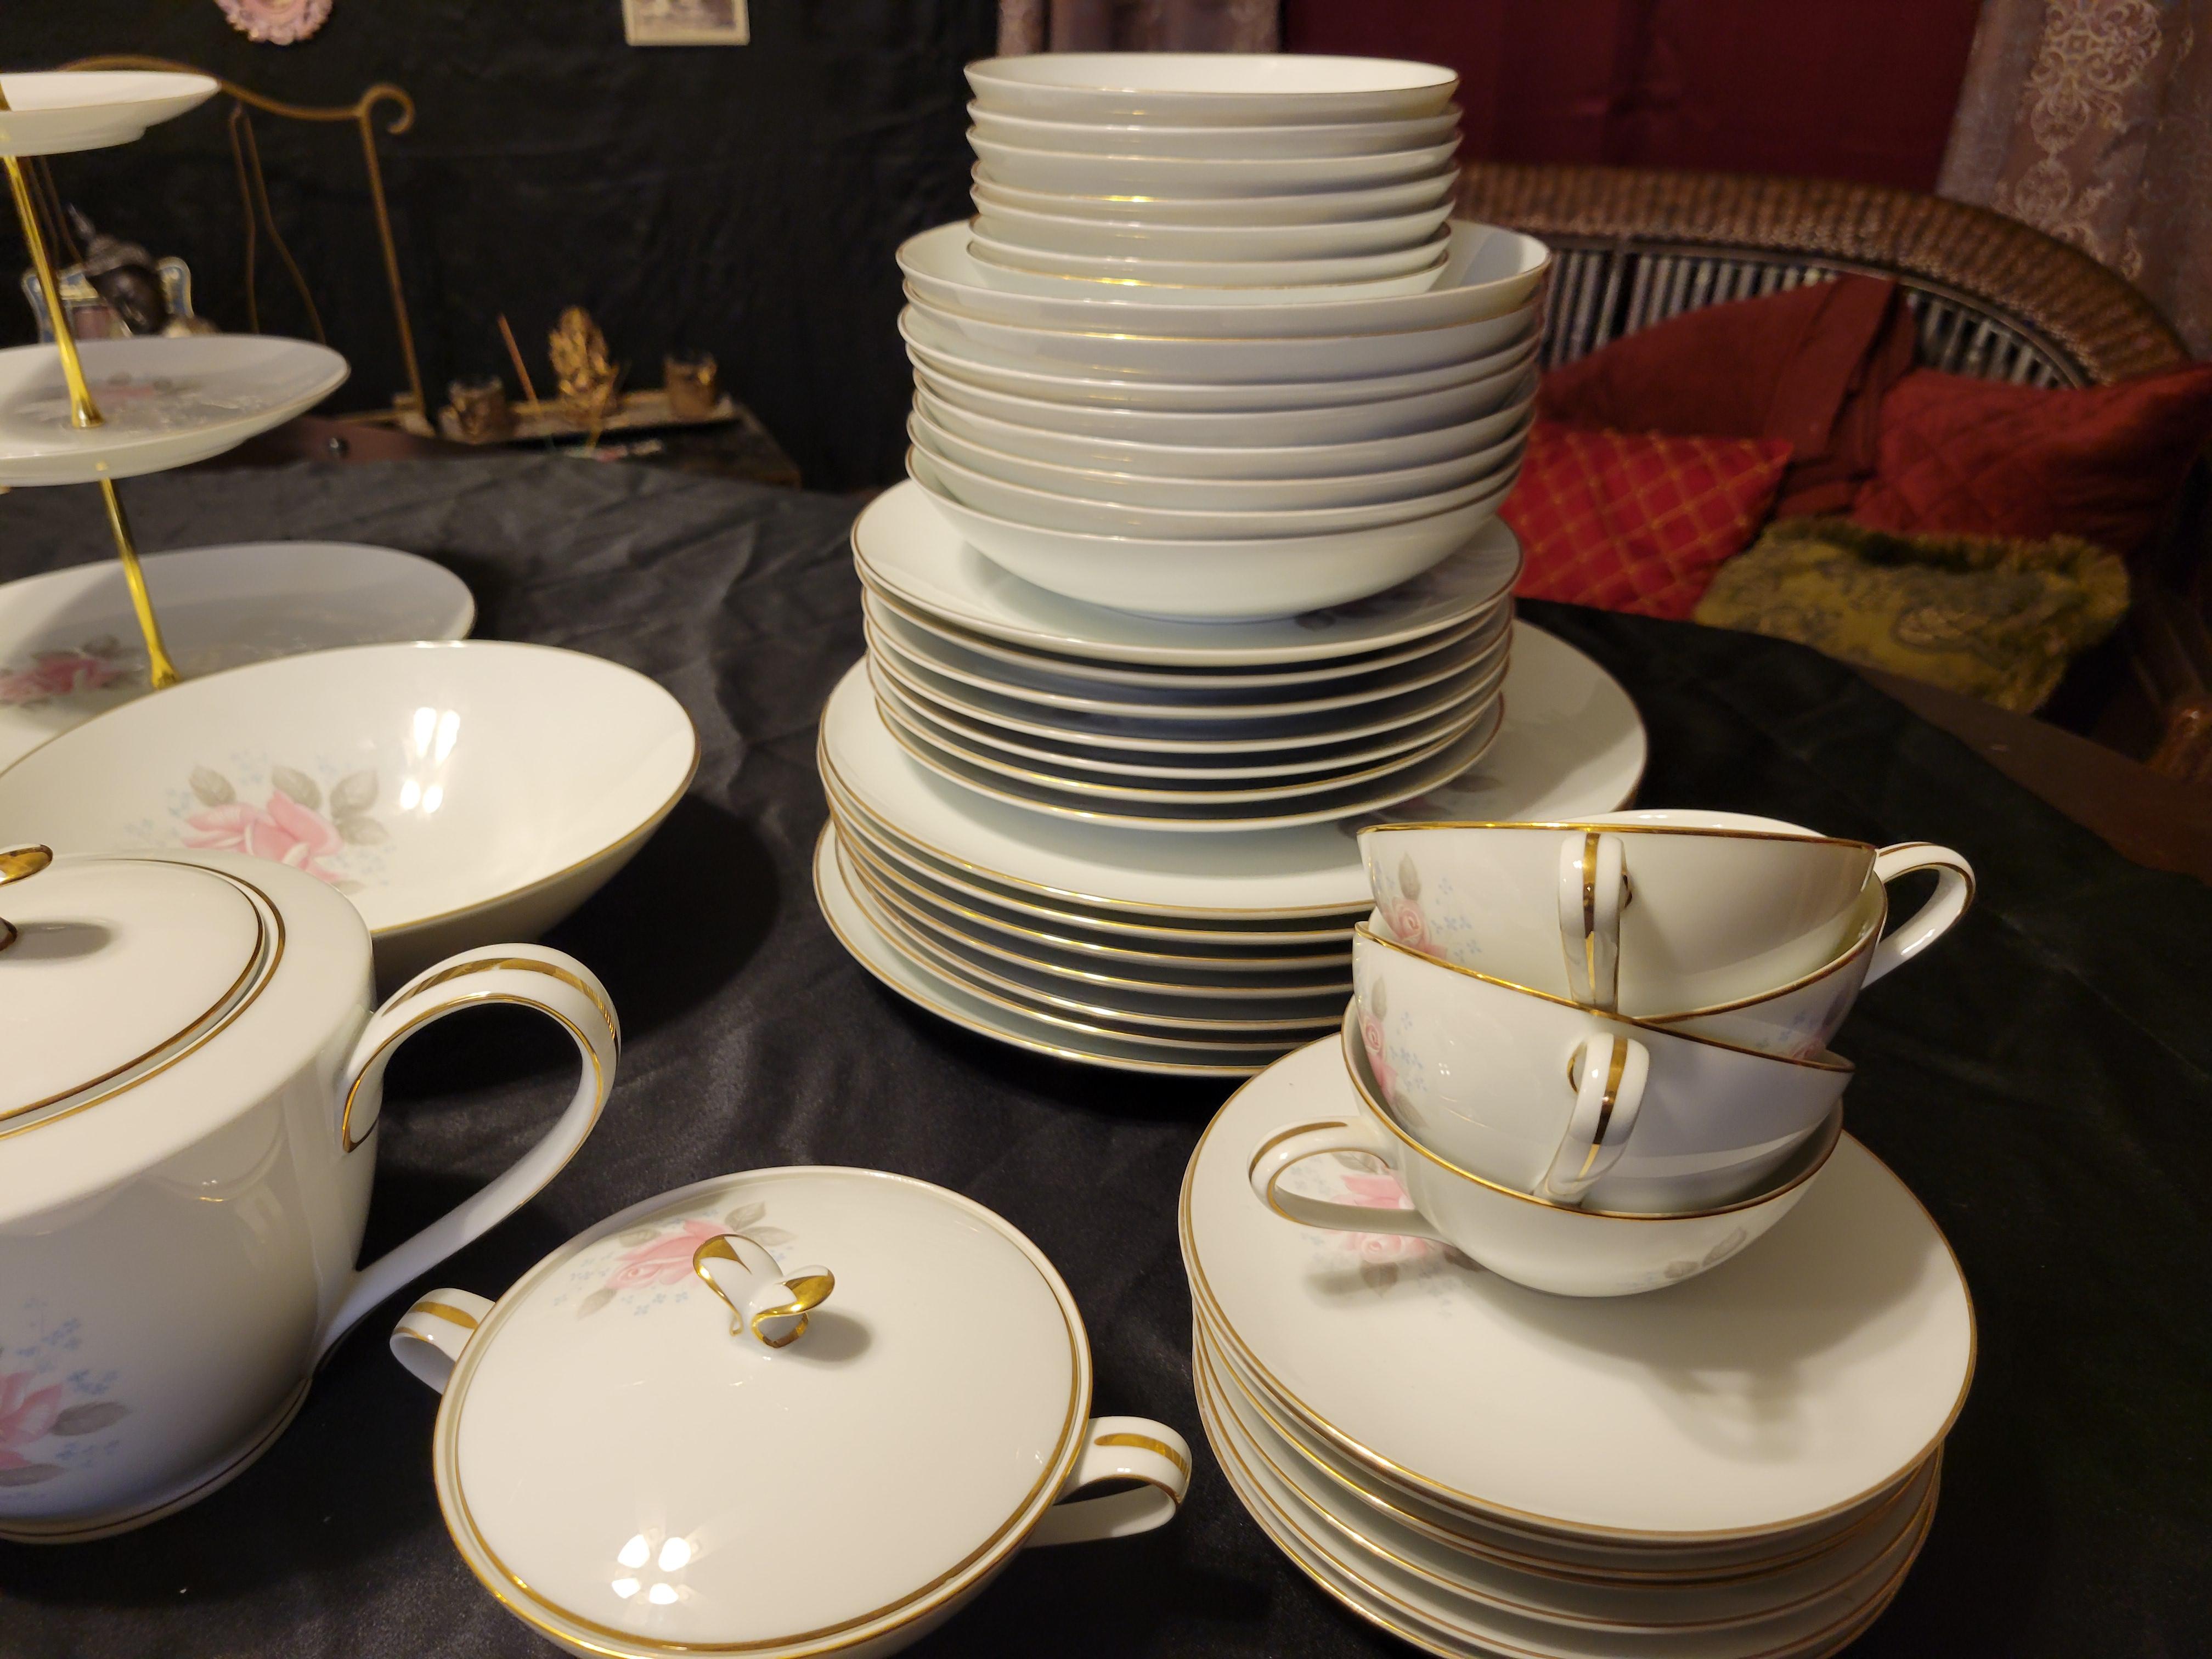 Vintage Noritake 'Roseville' Fine China Dining Set for 8 Persons - 79 Items For Sale 4